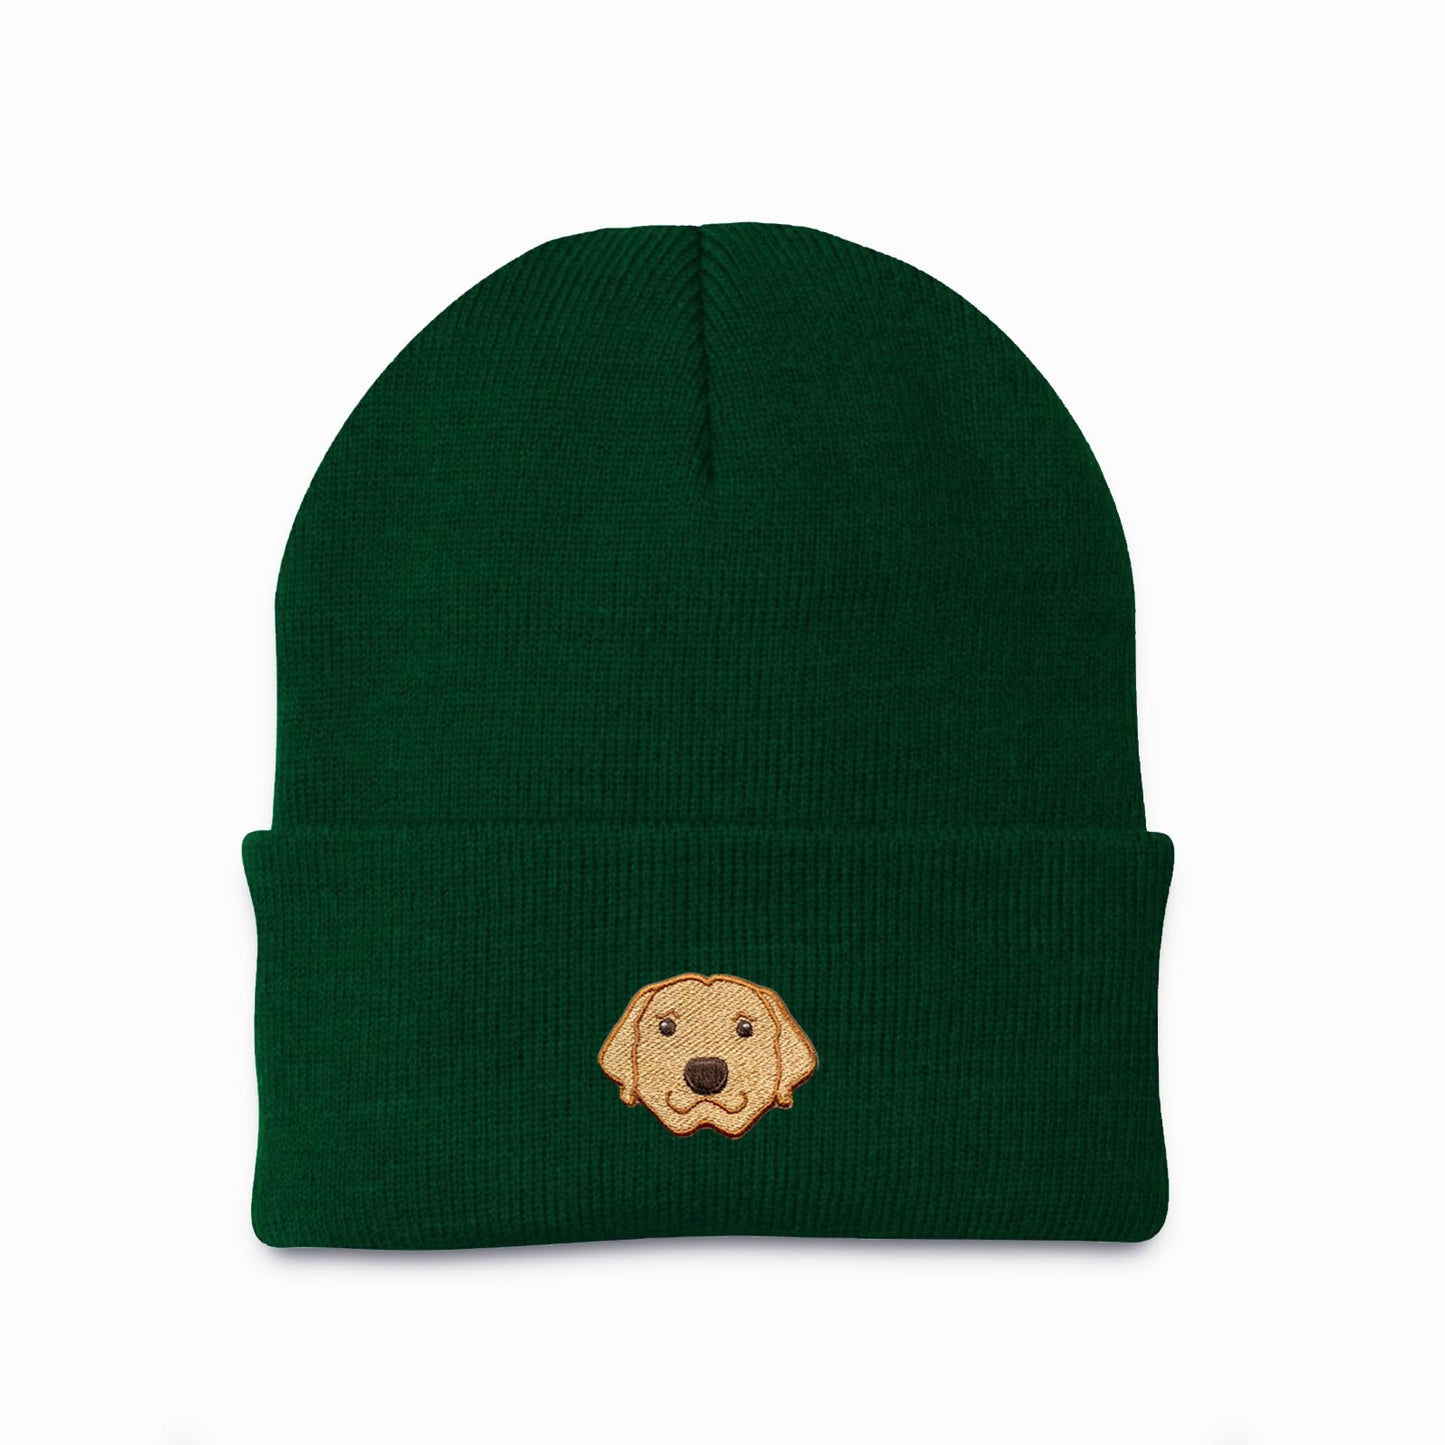 Green Custom Dog beanie personalized and embroidered on the front.